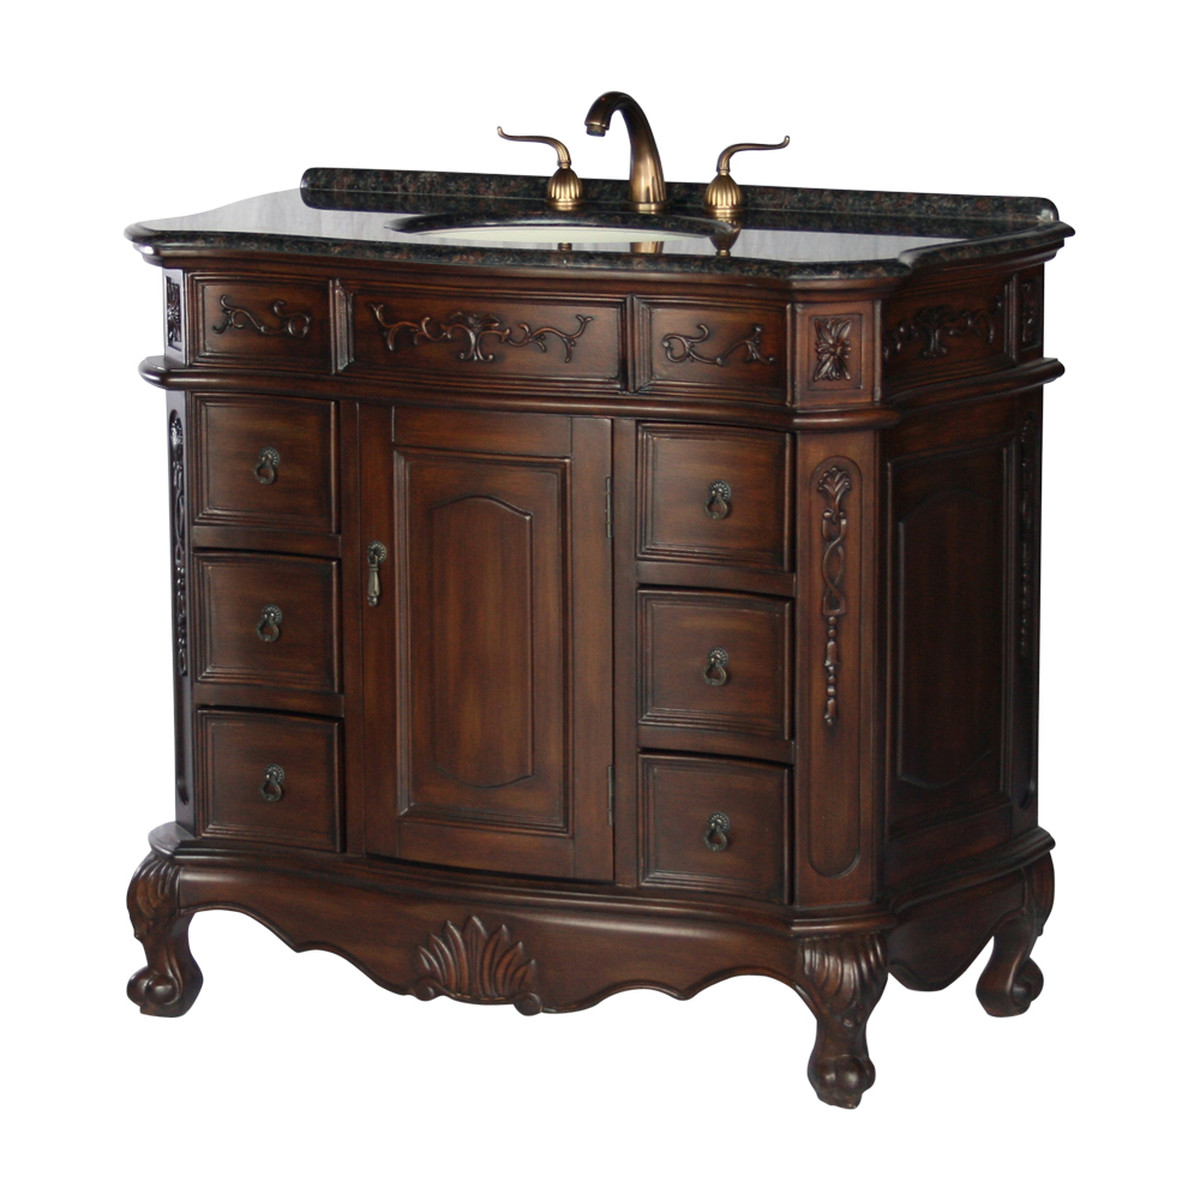 40" Adelina Antique Style Single Sink Bathroom Vanity in Walnut Finish with Coral Brown Stone Countertop with 1" Backsplash 